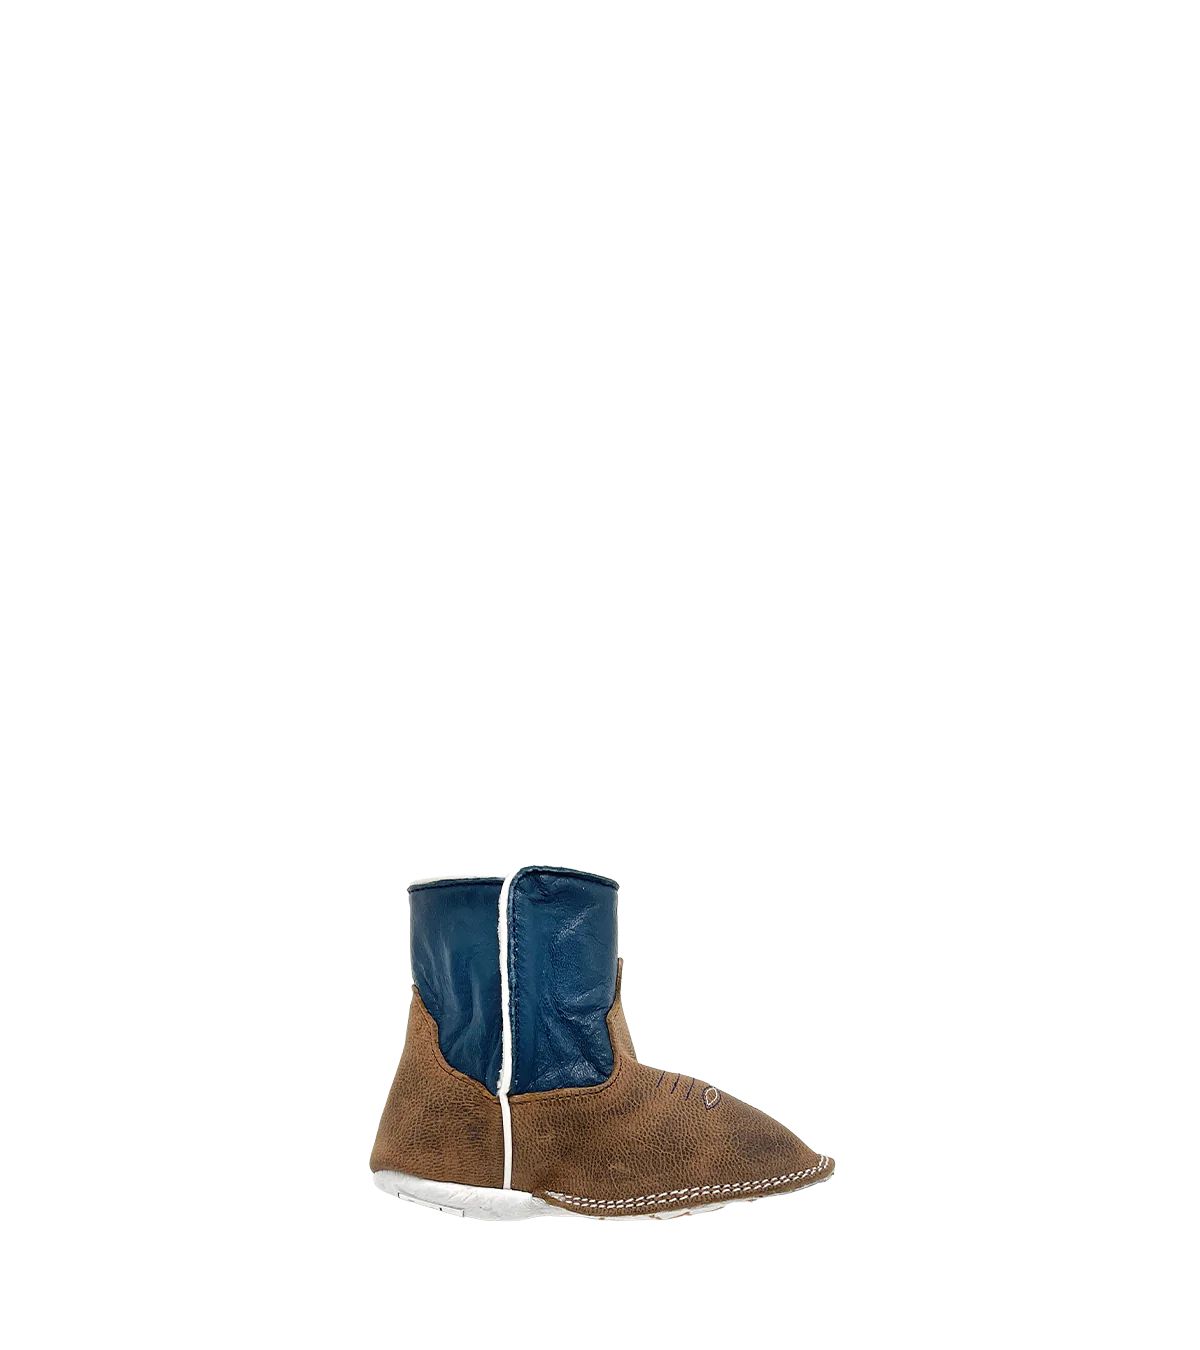 Miron Crosby Navy Baby Bootie | Luxury Fashion Kid's Cowboy Boots | Miron Crosby | Miron Crosby